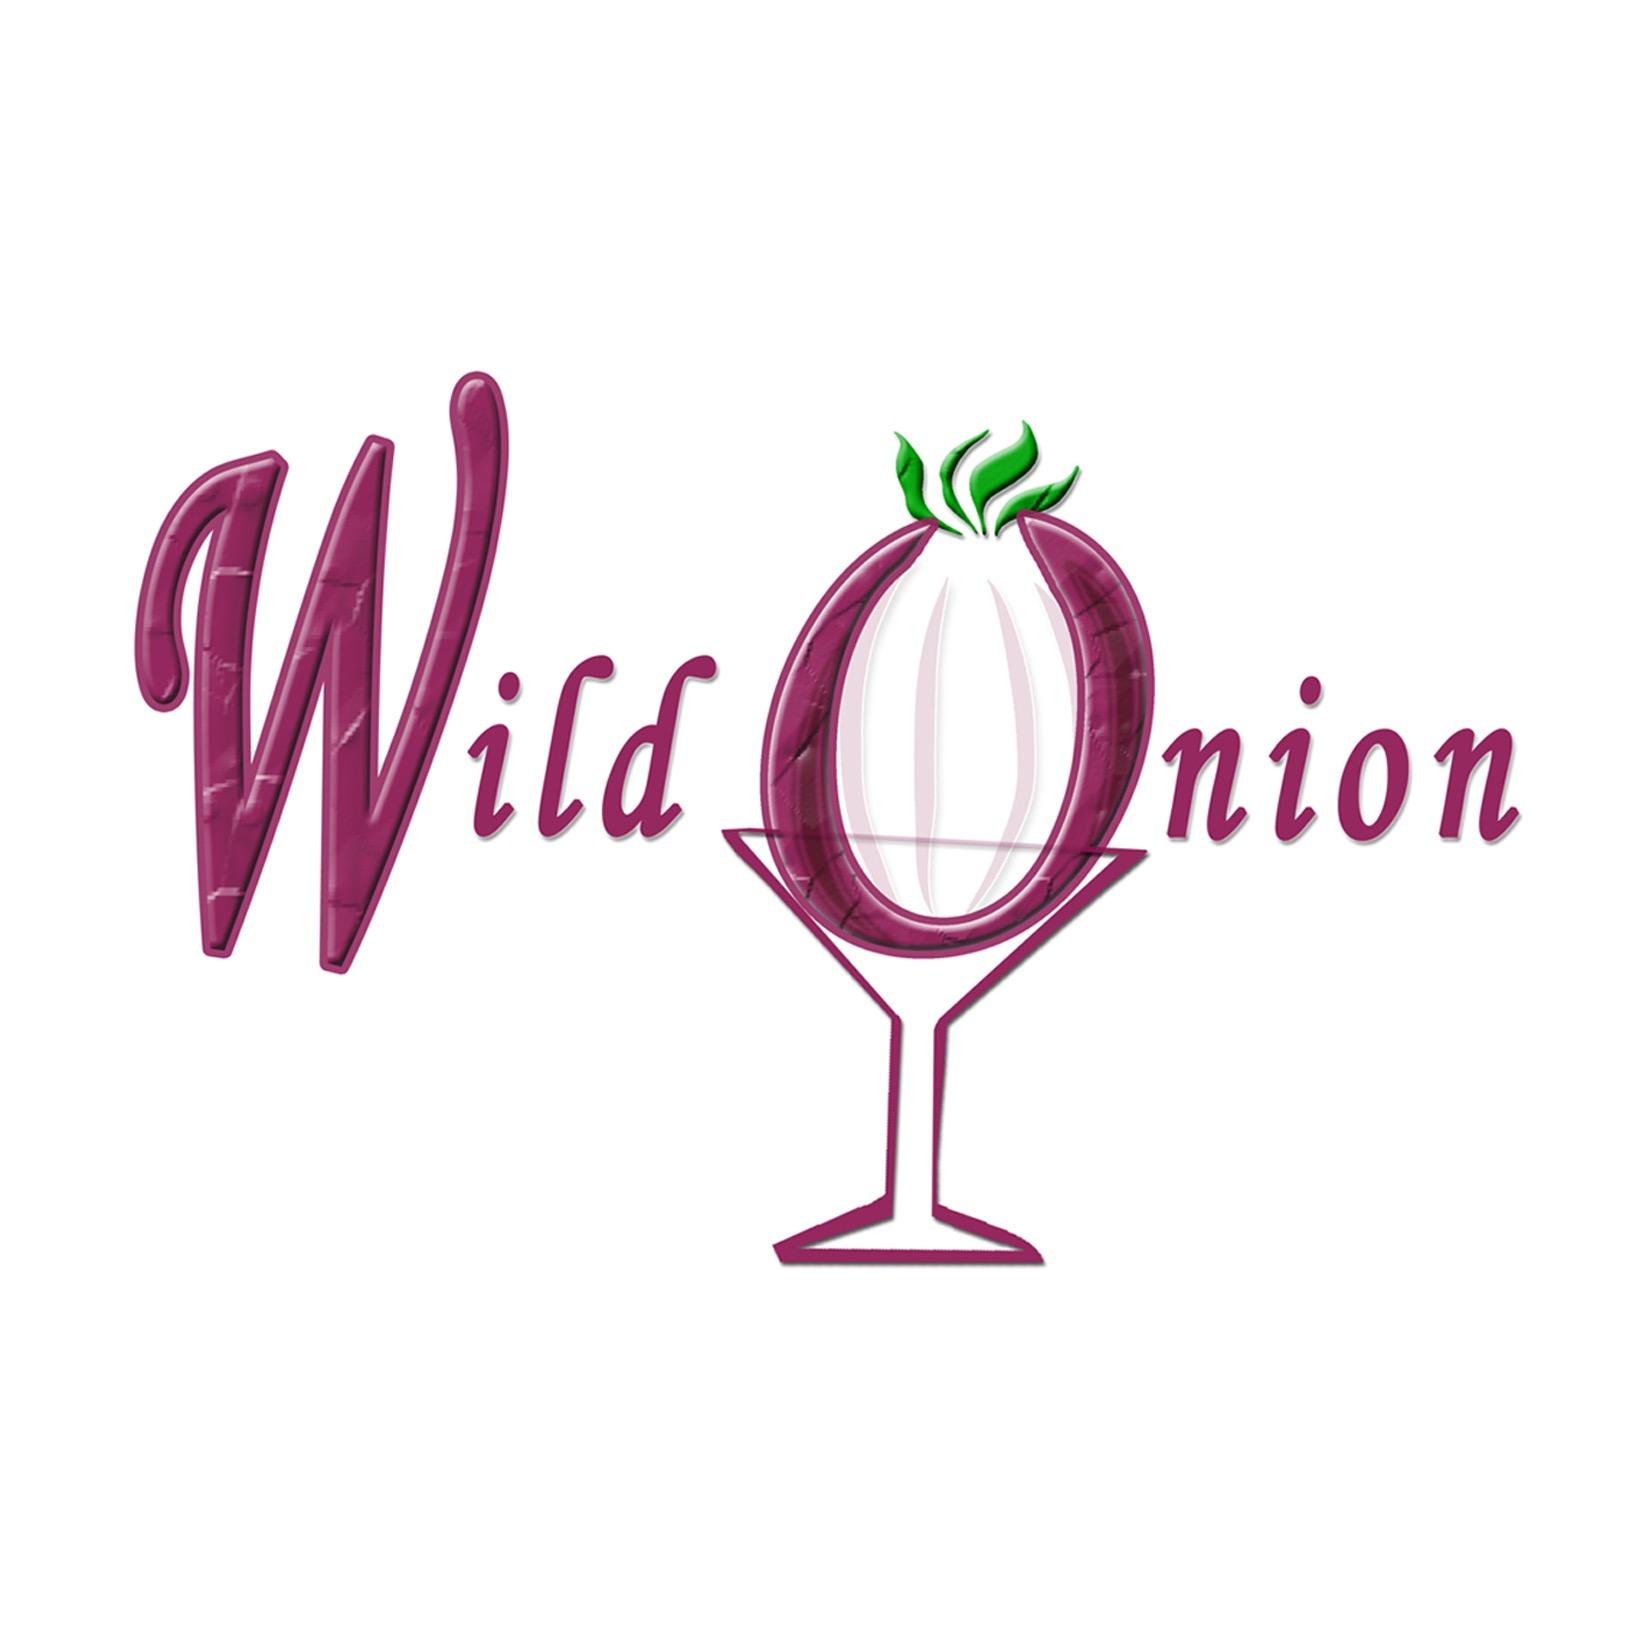 The Wild Onion captures the attitude and atmosphere of the bar-restaurant life of Chicago with great food, drinks and home of birthday Tuesday!